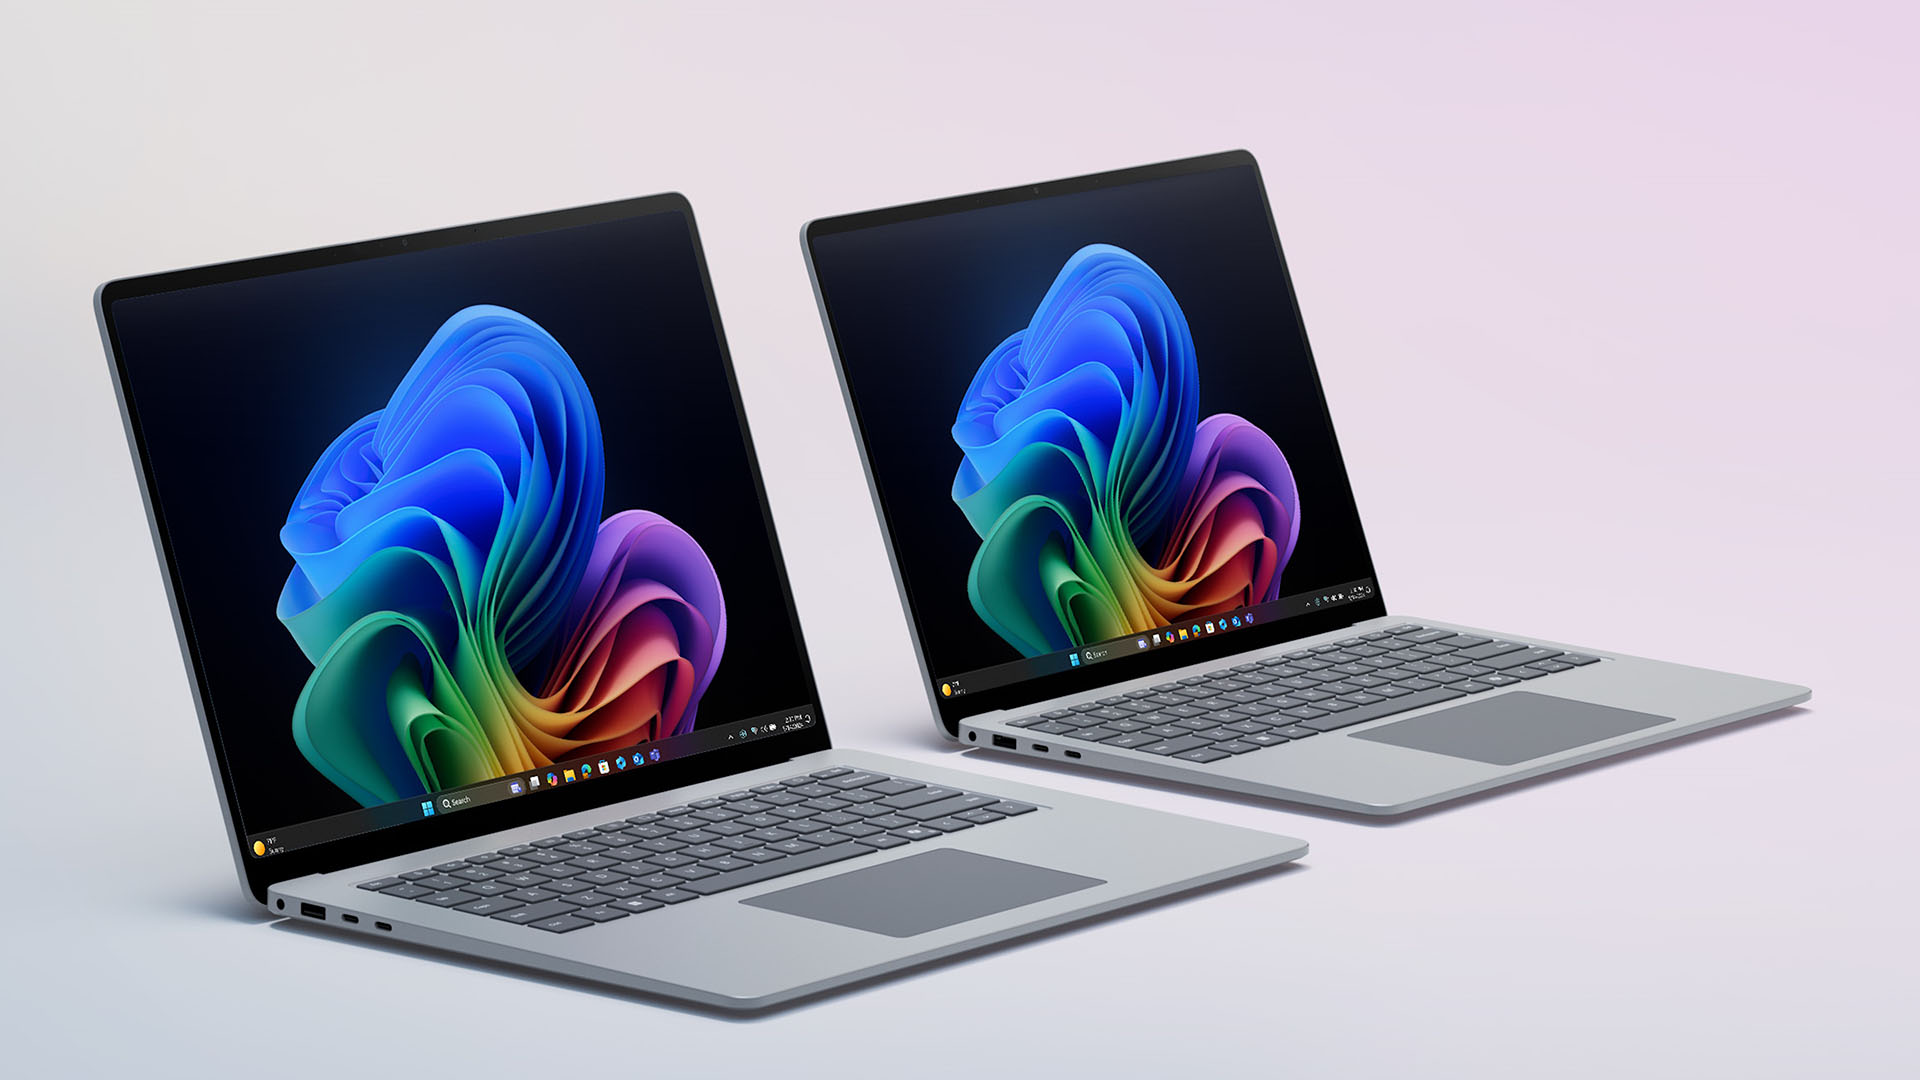 Accelerating AI in the workplace with the all-new Surface Laptop and Surface Pro